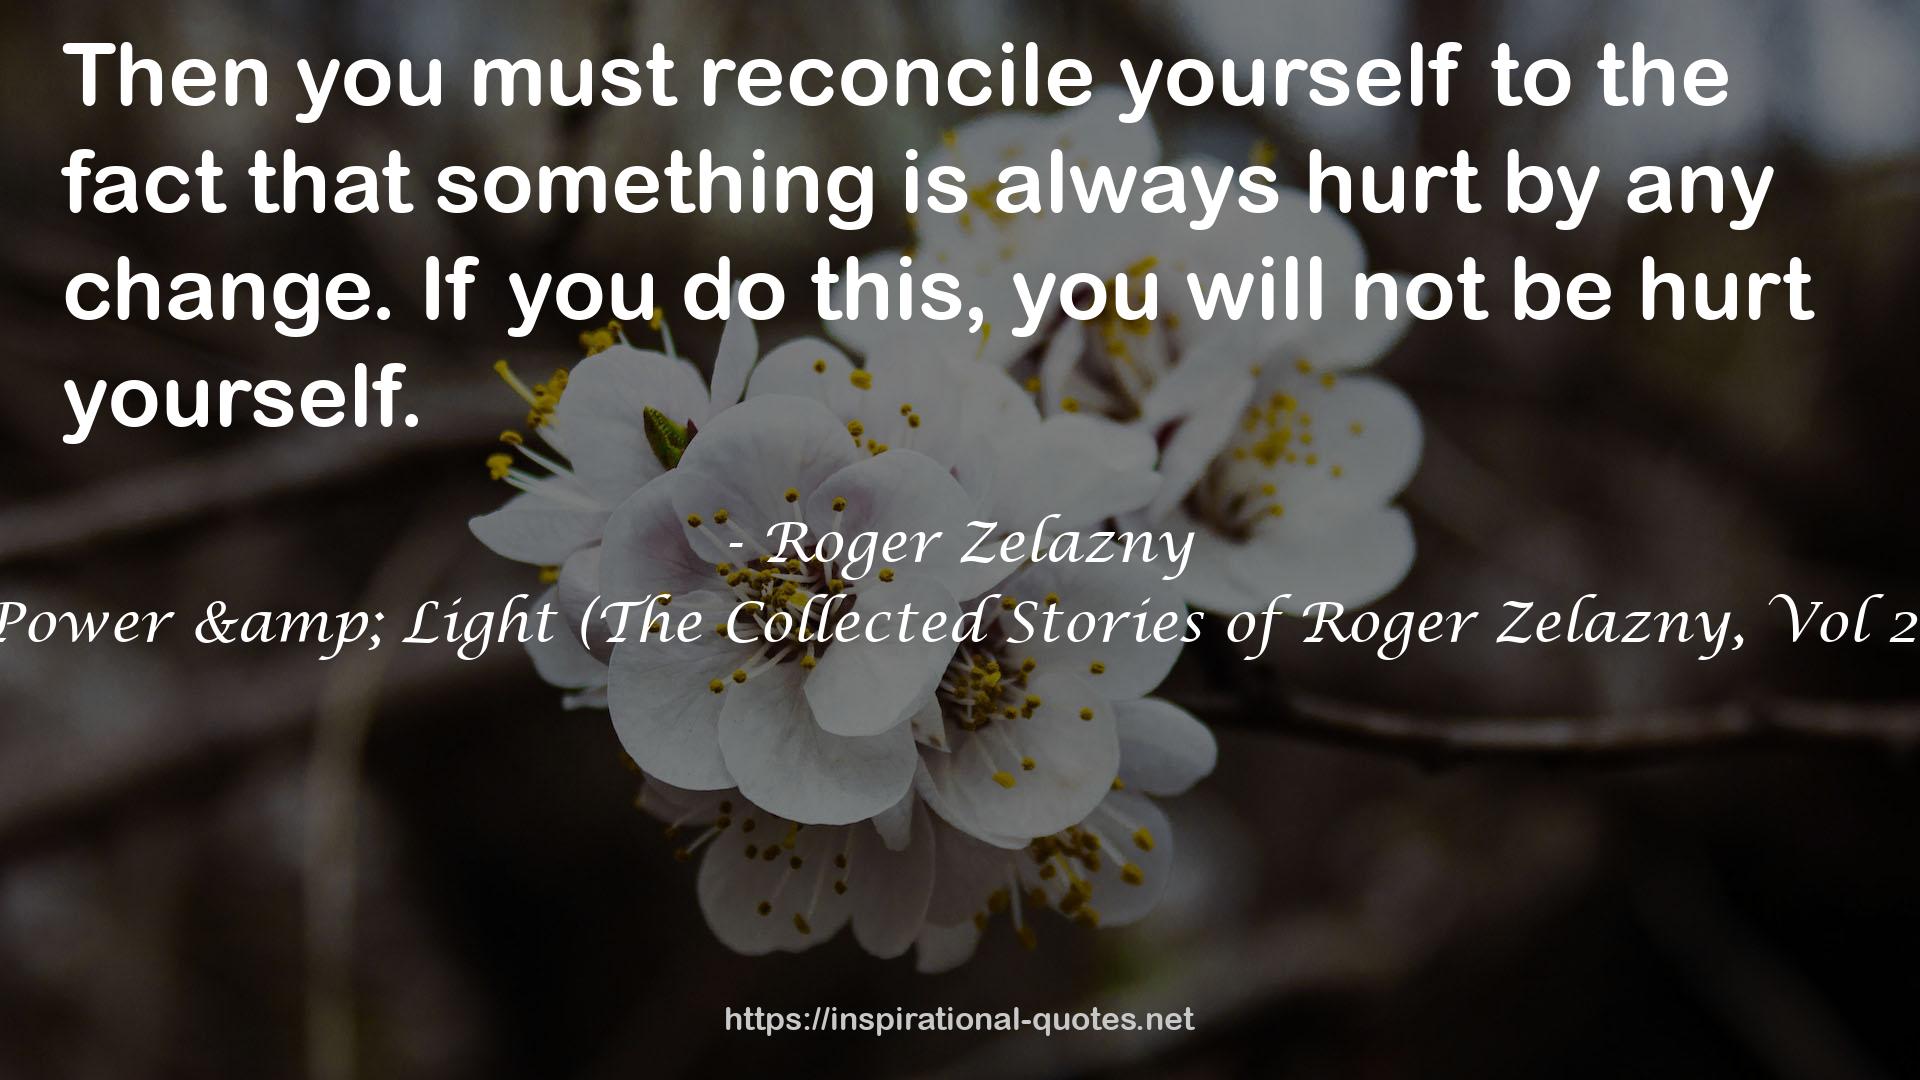 Power & Light (The Collected Stories of Roger Zelazny, Vol 2) QUOTES